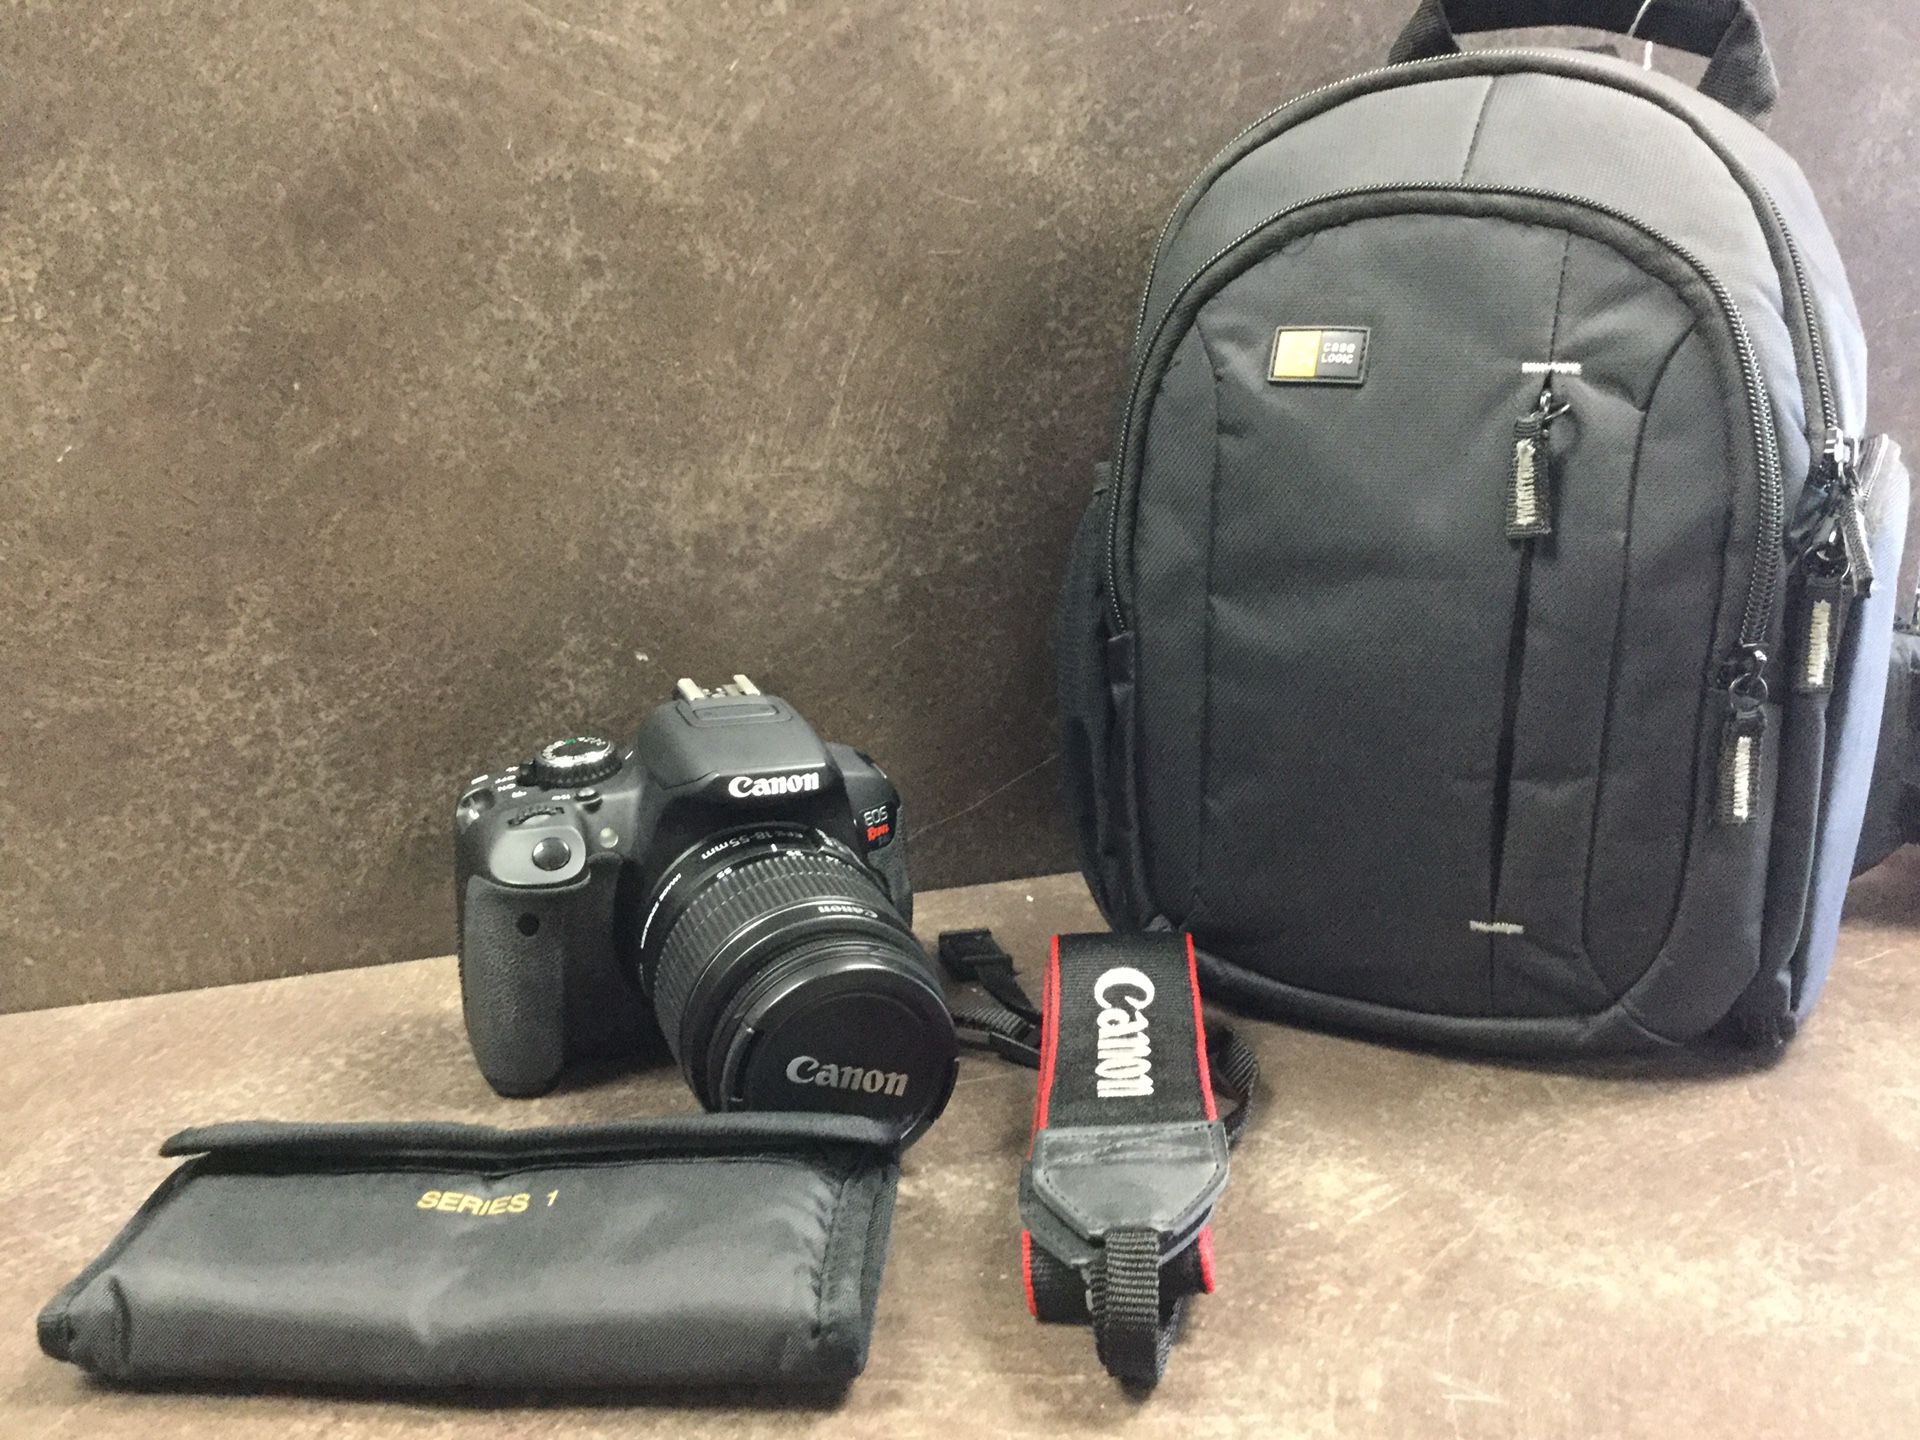 CANON EOS REBEL T4i - WITH 18-55mm KIT LENS + More